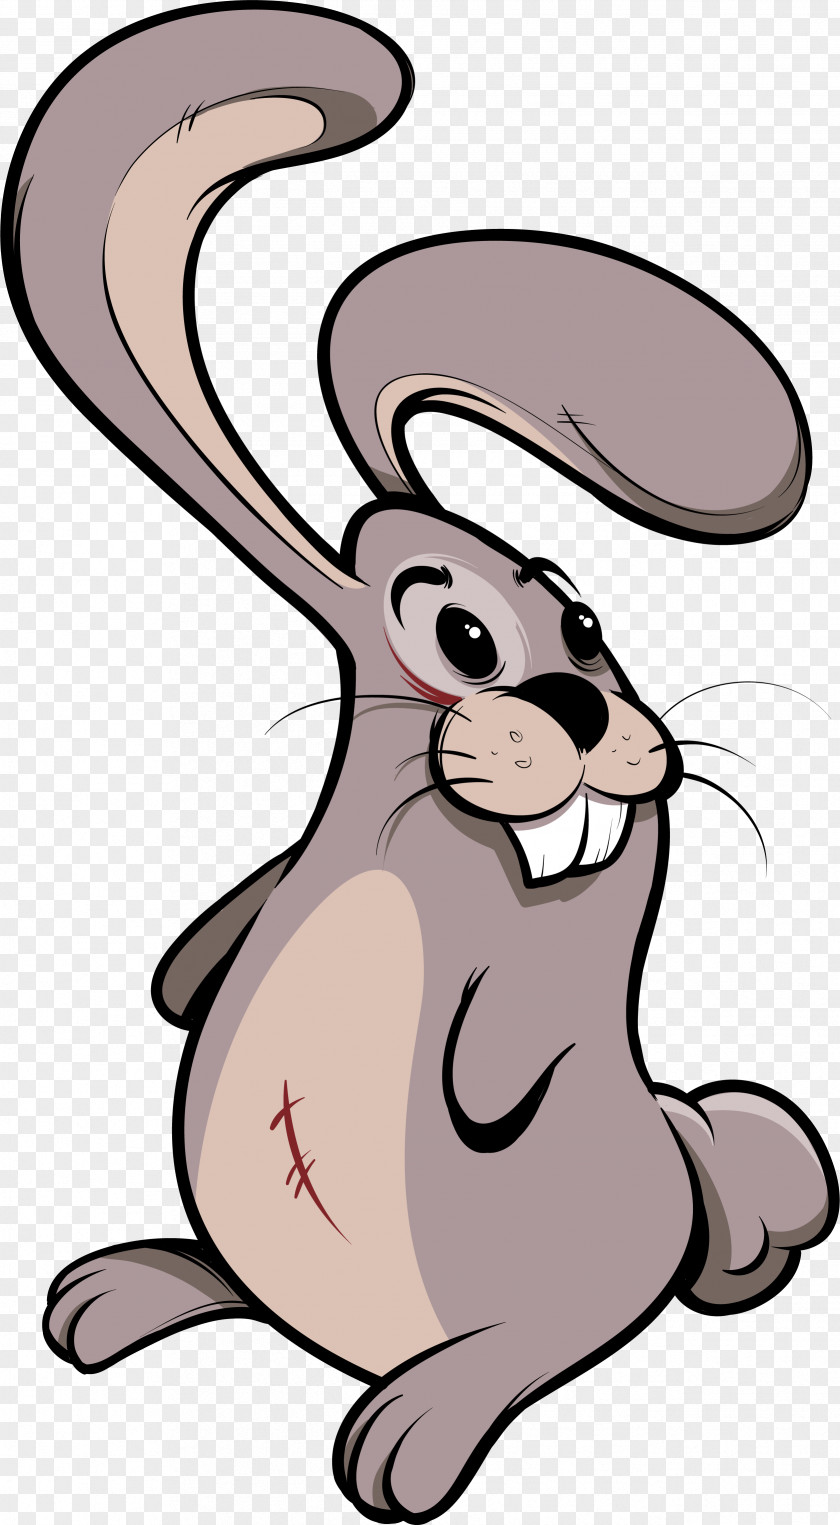 Cartoon Hand Drawing Rabbit Domestic Little White Illustration PNG